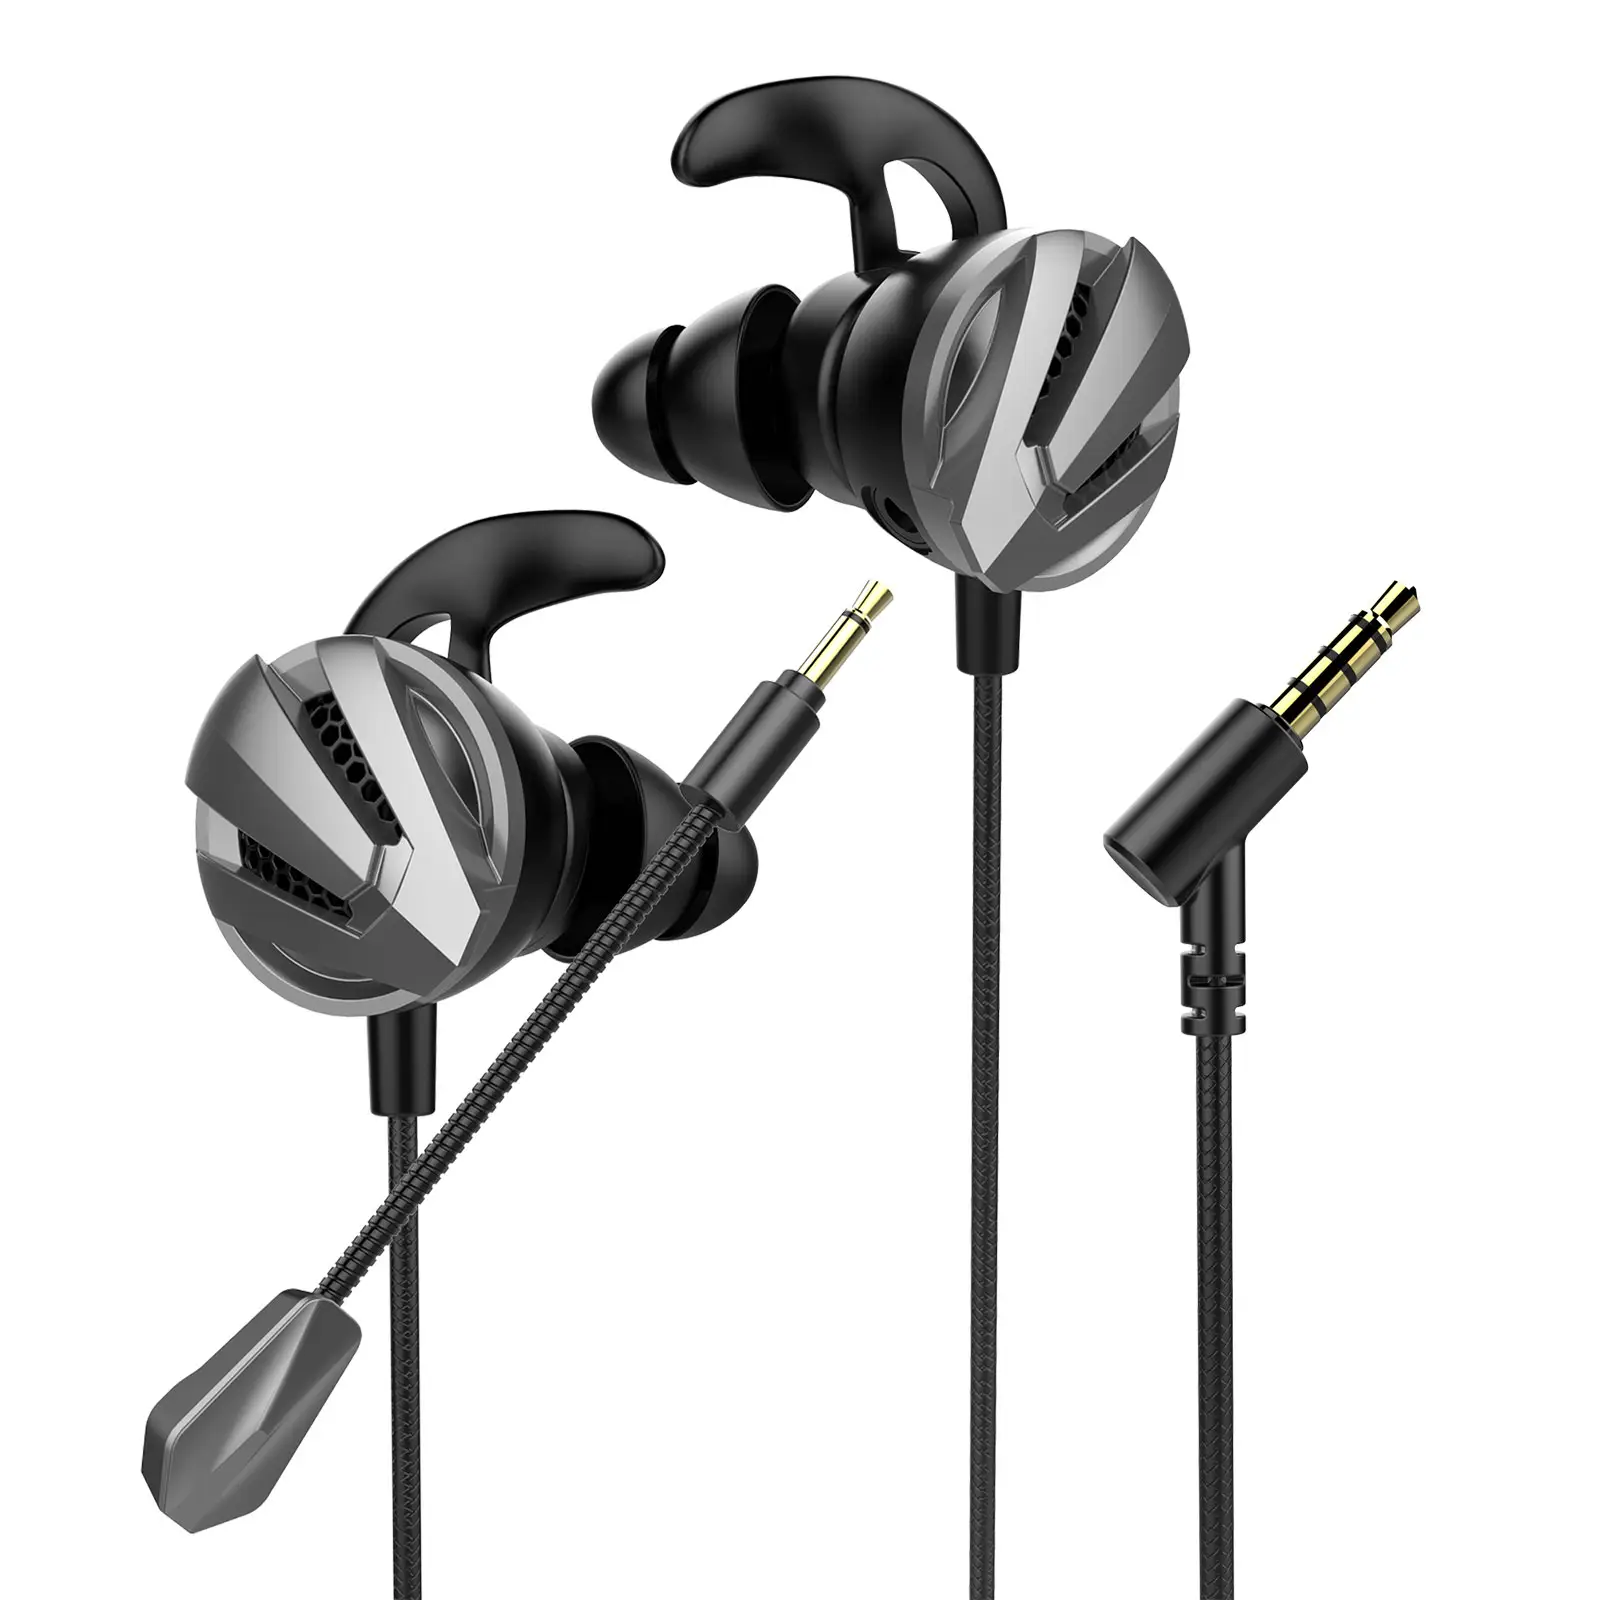 Earphone wired earphone for 3.5mm bass stereo sound ps4 gaming microphone headset best gaming headset 2020